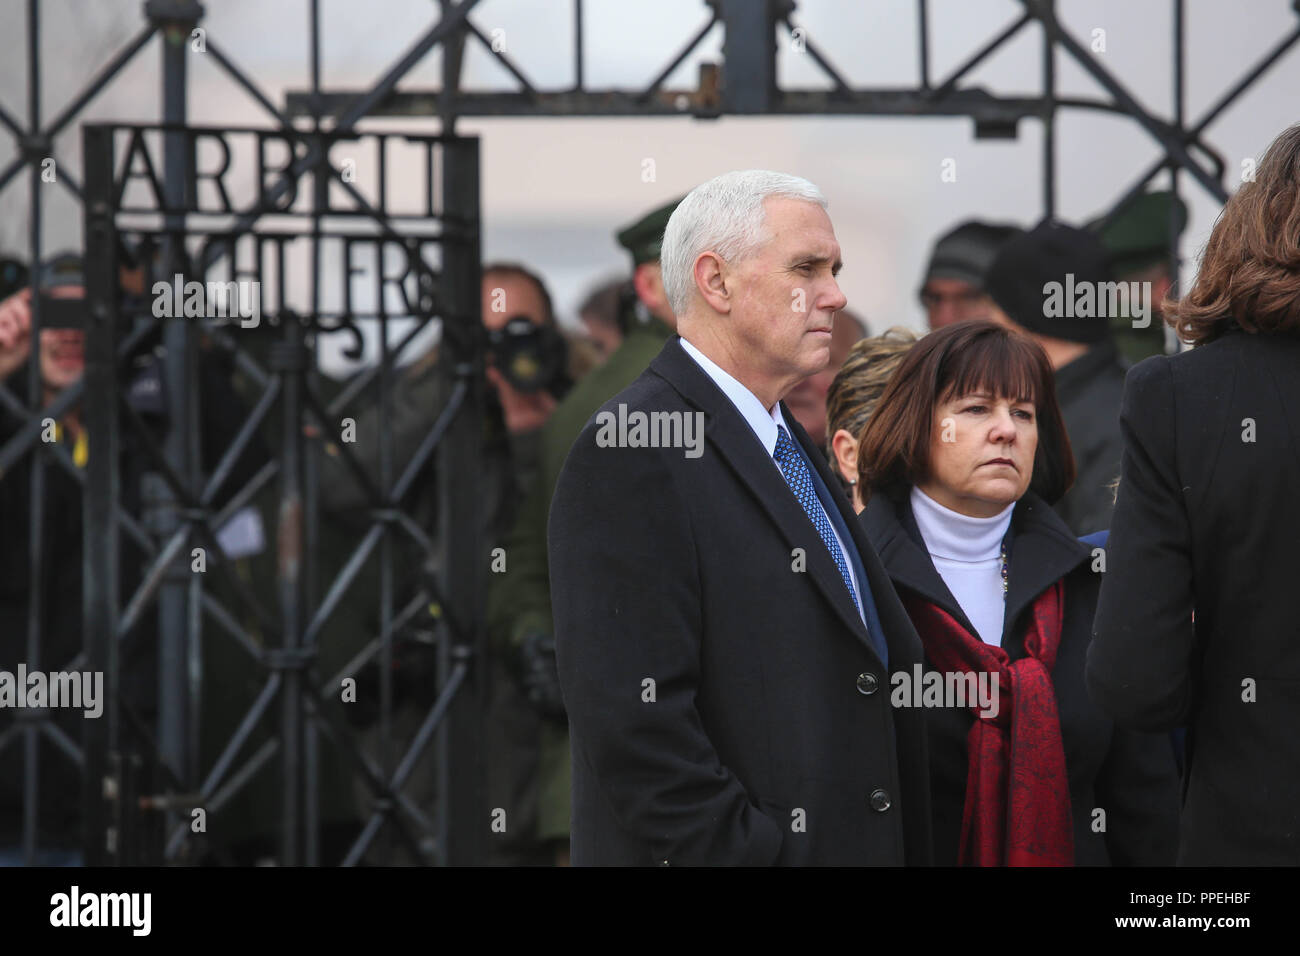 The American Vice President Mike Pence and his wife Karen on a visit to the Dachau Concentration Camp Memorial Site. Stock Photo